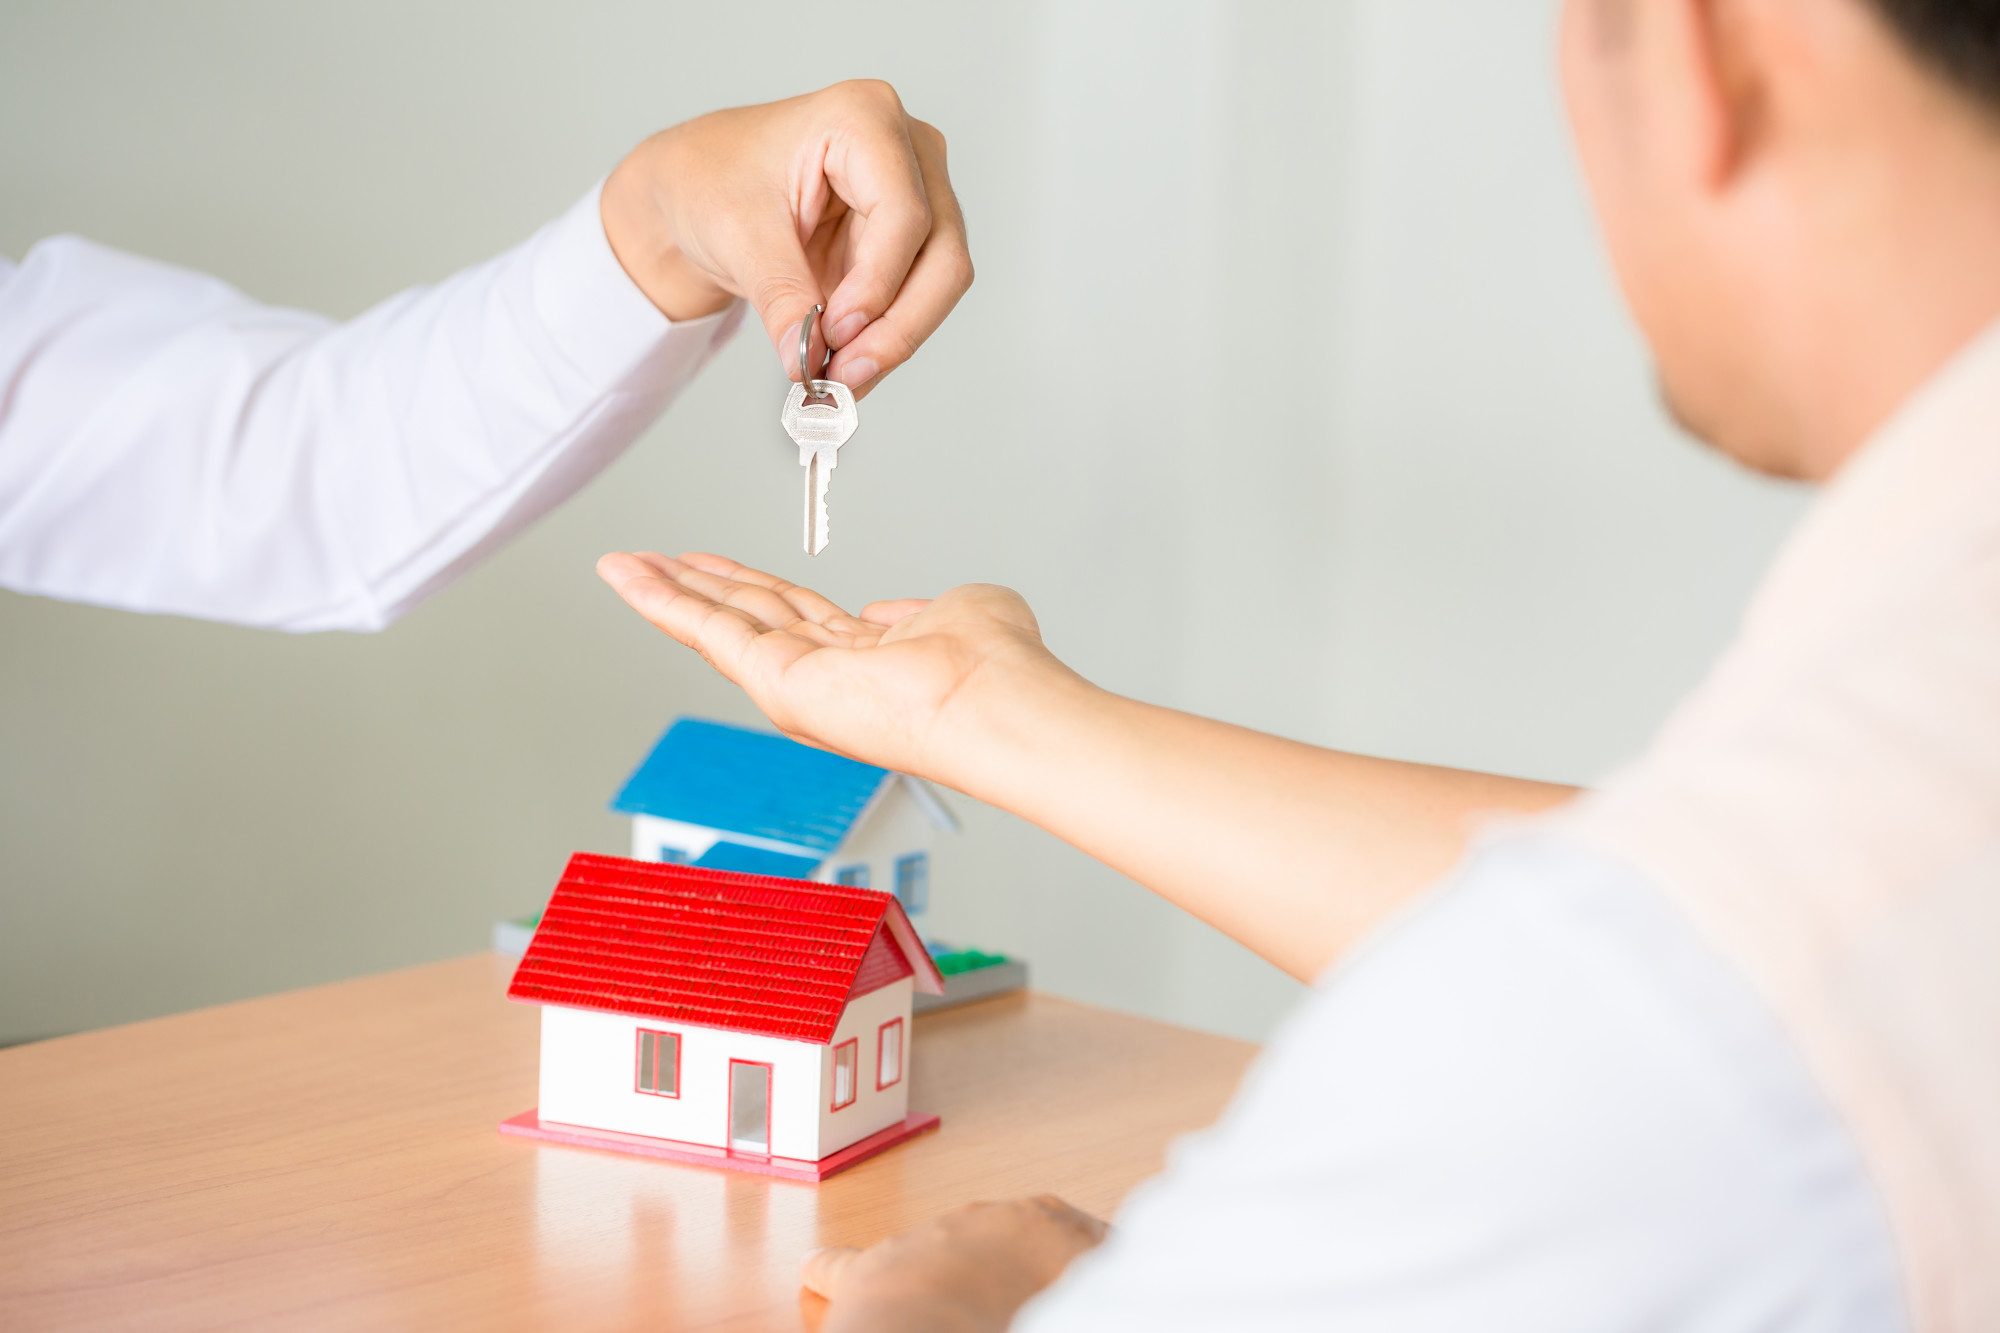 Property management company near me: Do you want to know about the most common mistakes that they make? Read on to learn more.